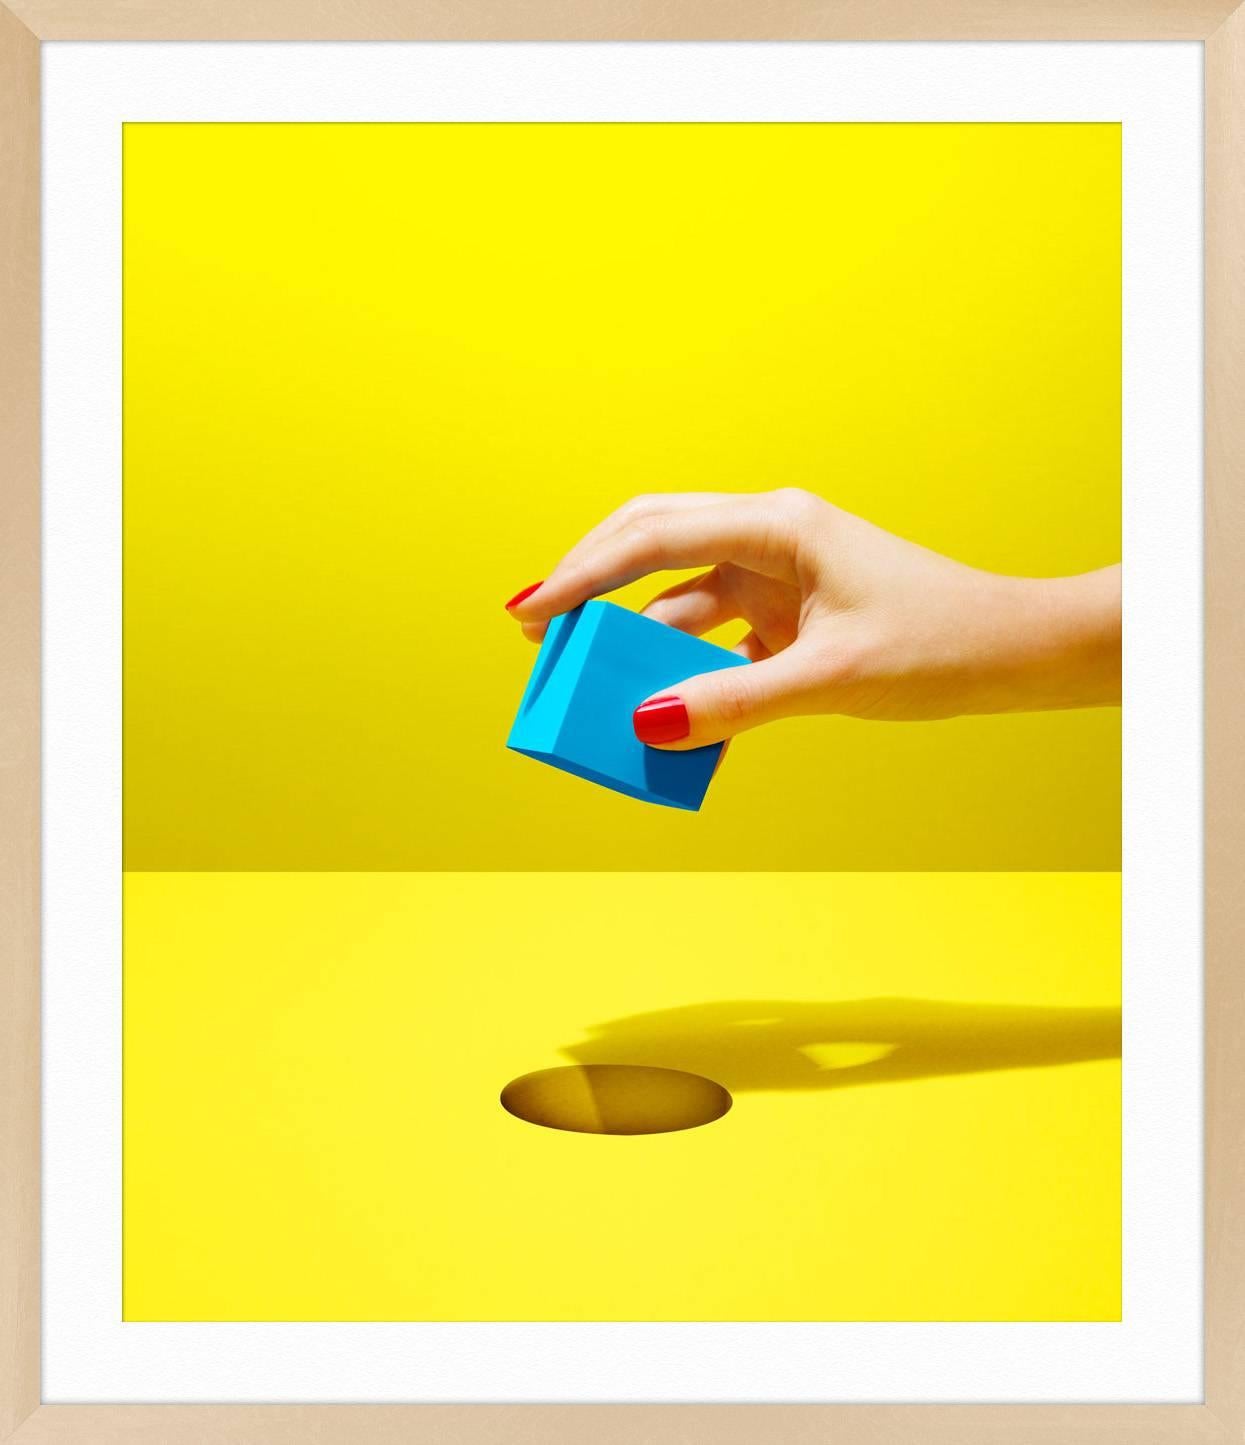 You Aren't What You Think You Are- Square Peg / Round Hole - Yellow Abstract Photograph by Dan Saelinger